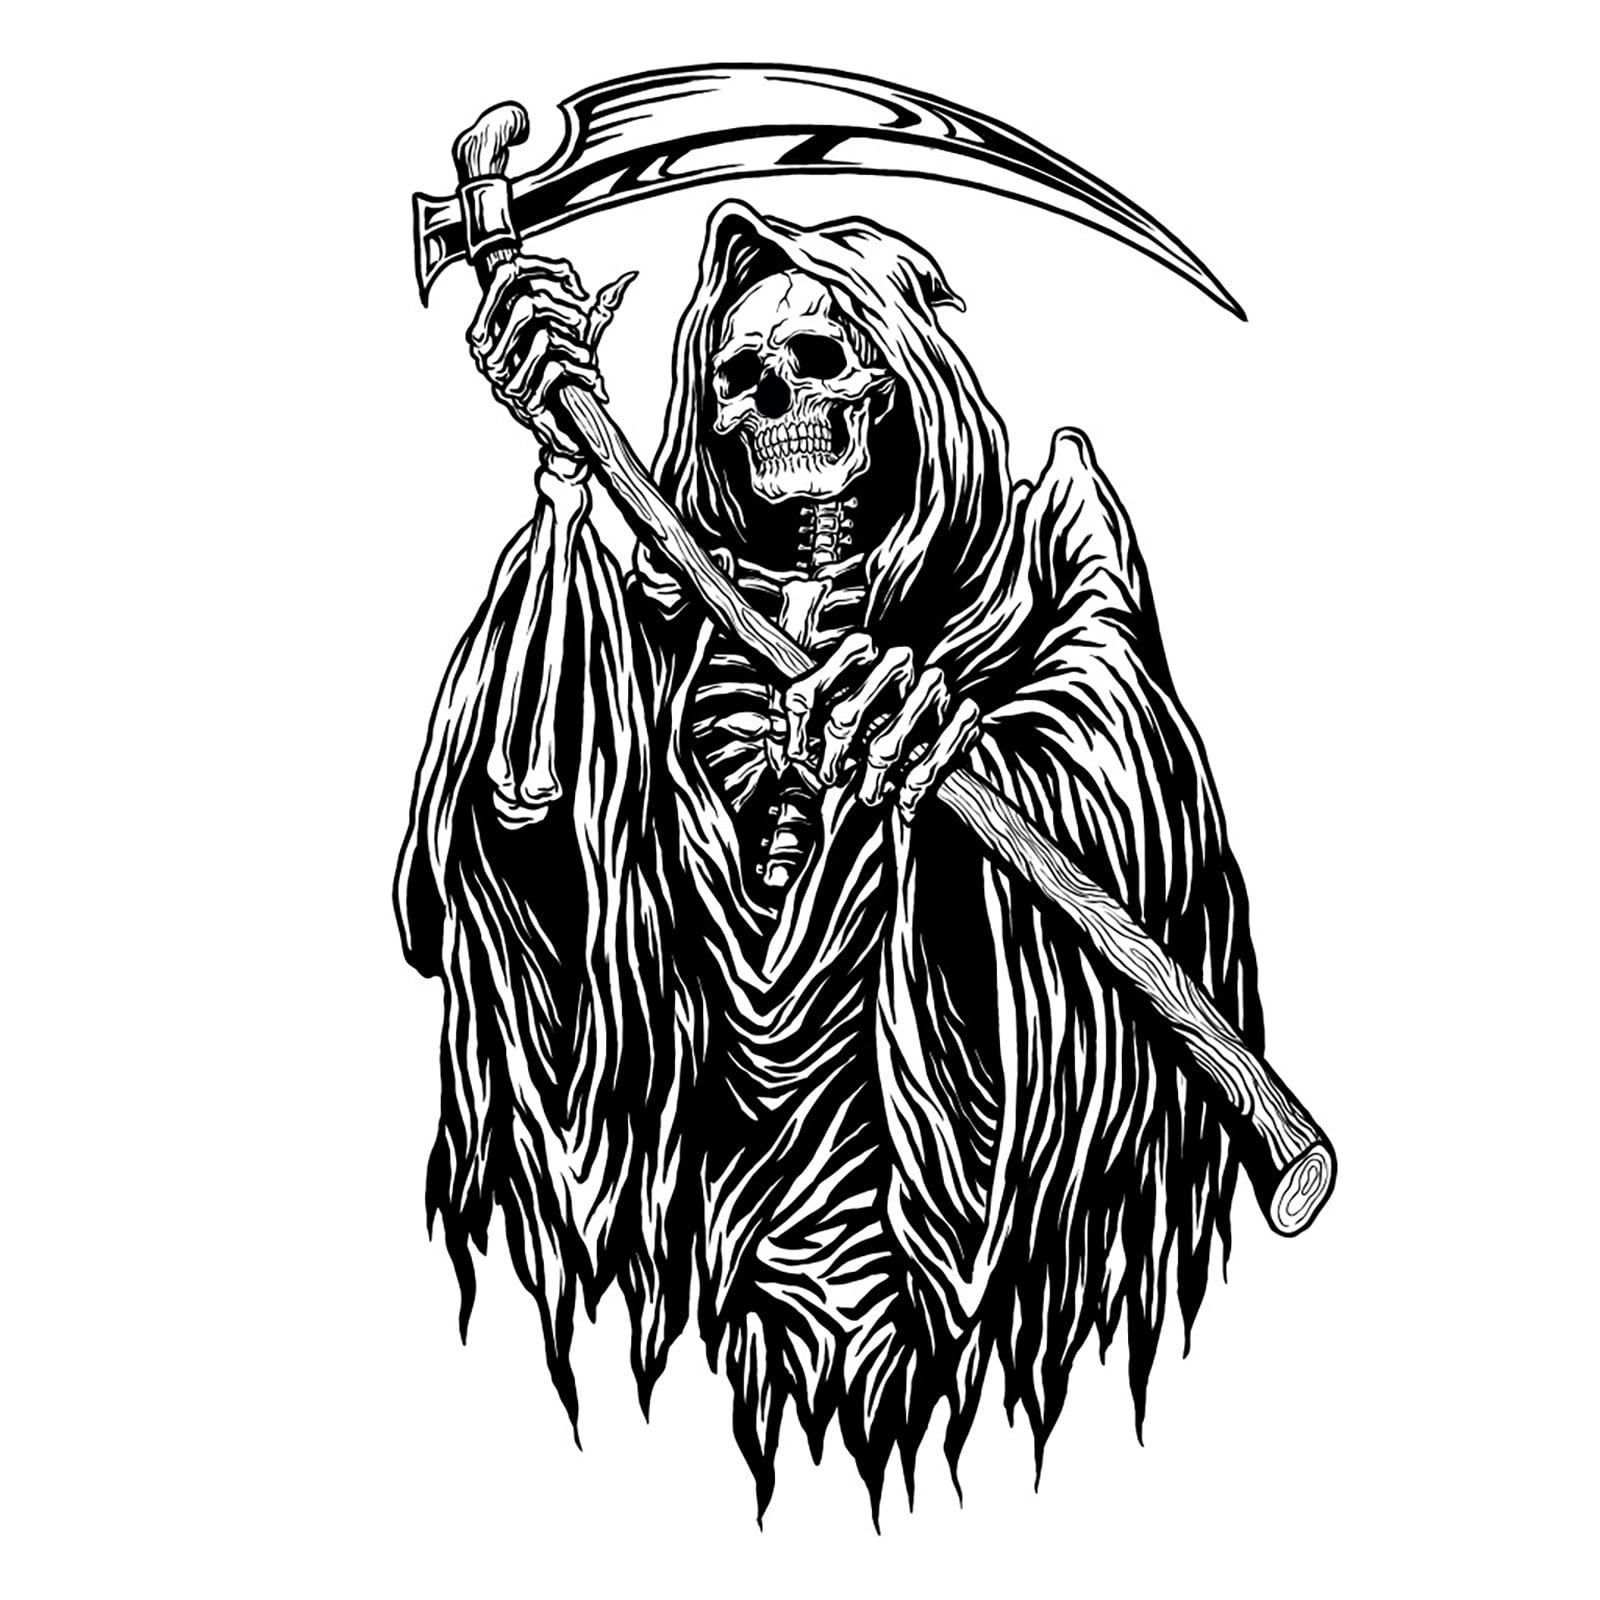 Father Time Hourglass Scythe Grim Reaper Death Vinyl sticker decal 